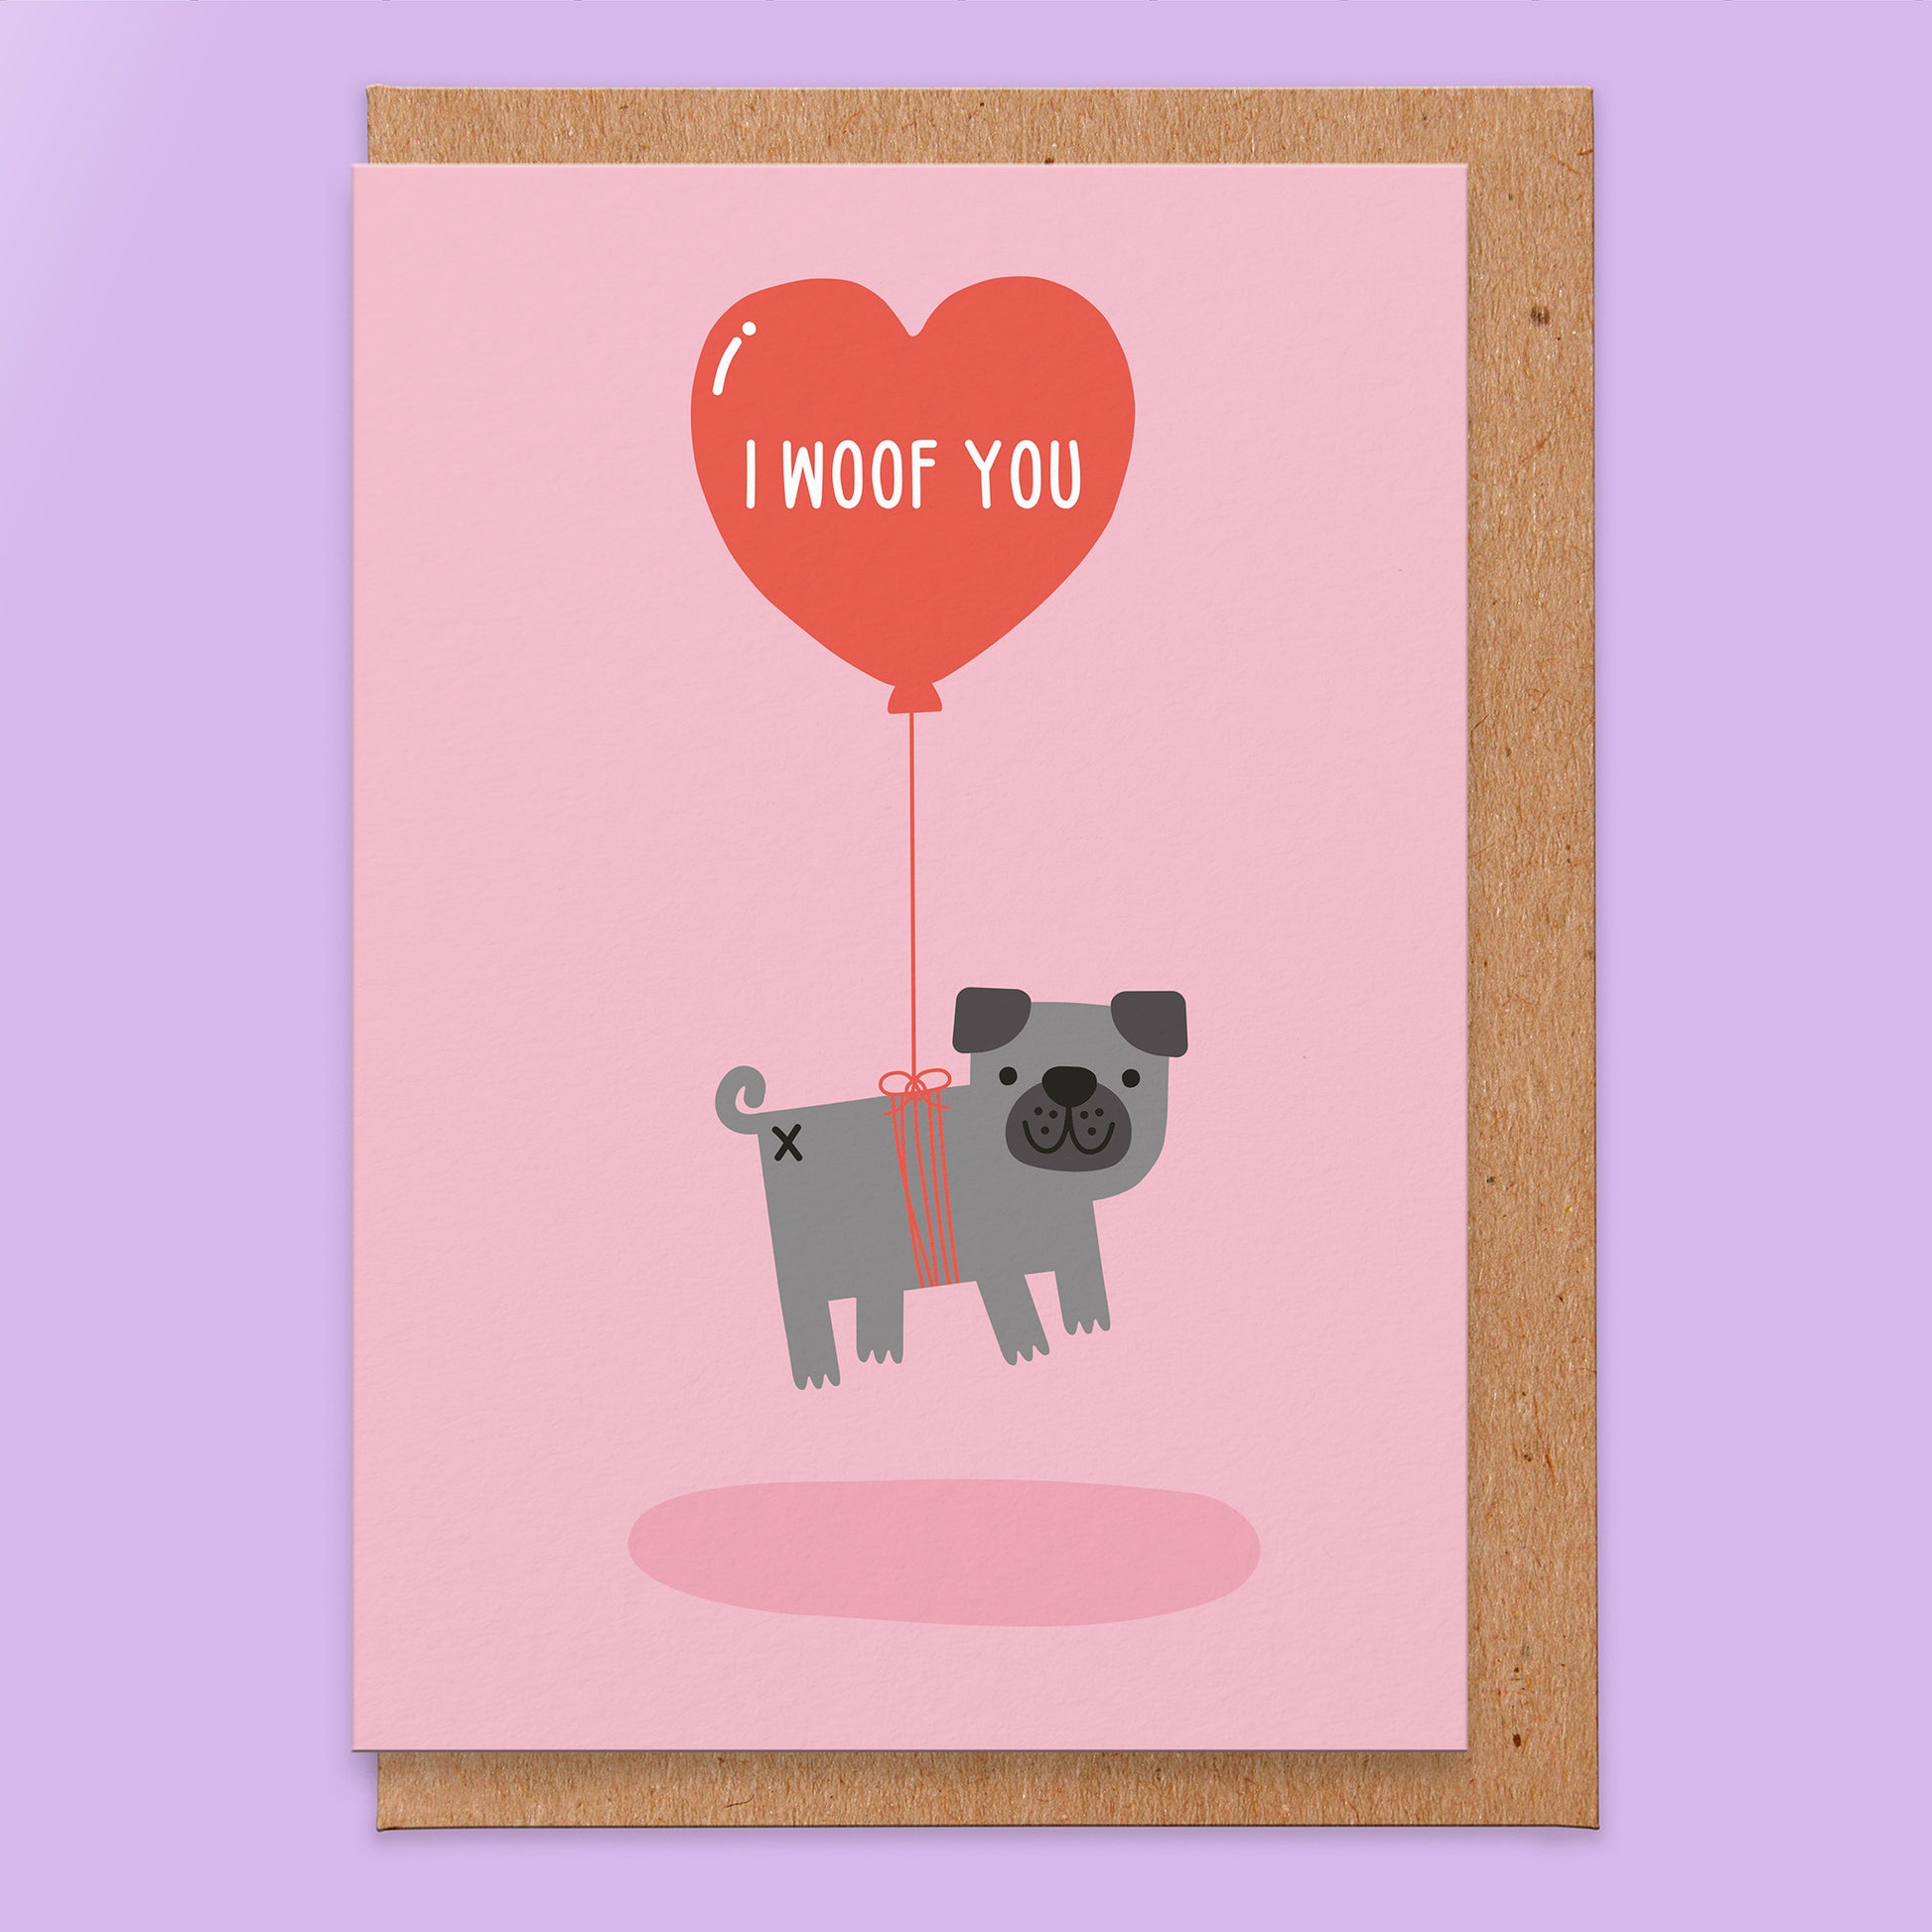 Love card that has a pink background and an illustration of a grey pug being lifted by a balloon in a heart shape that has I woof you in it.